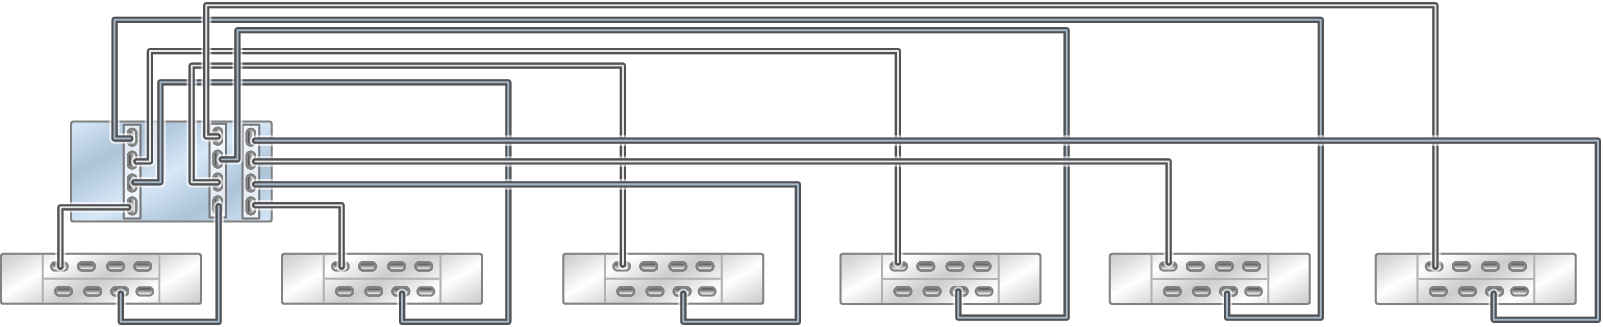 Standalone Oracle ZFS Storage ZS5-4 controller with three HBAs connected to six Oracle Storage Drive Enclosure DE3-24 disk shelves in six chains